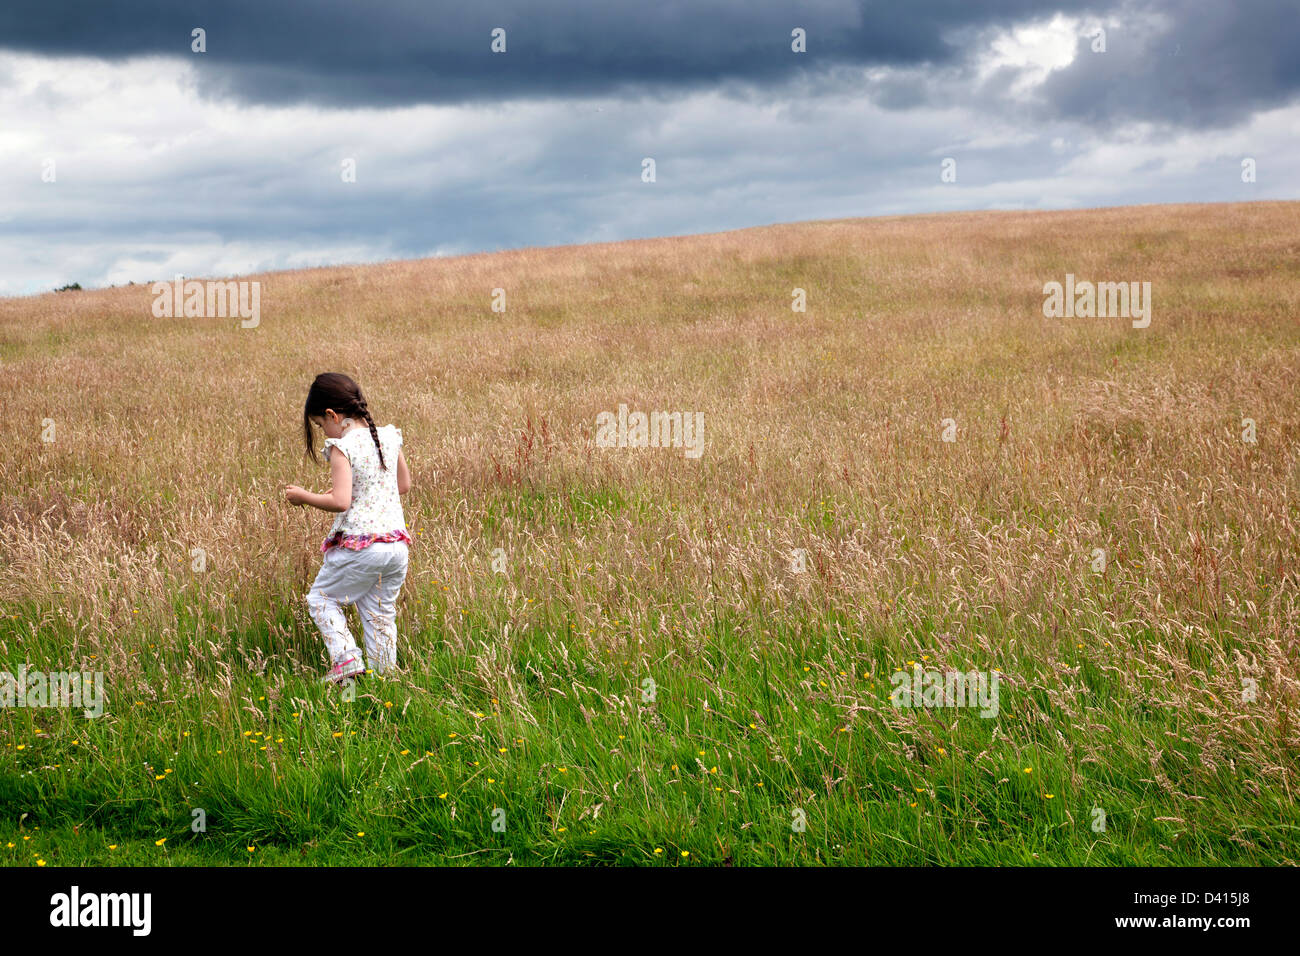 A little girl walking with her back to the camera in a summer field with a heavy dark sky Stock Photo